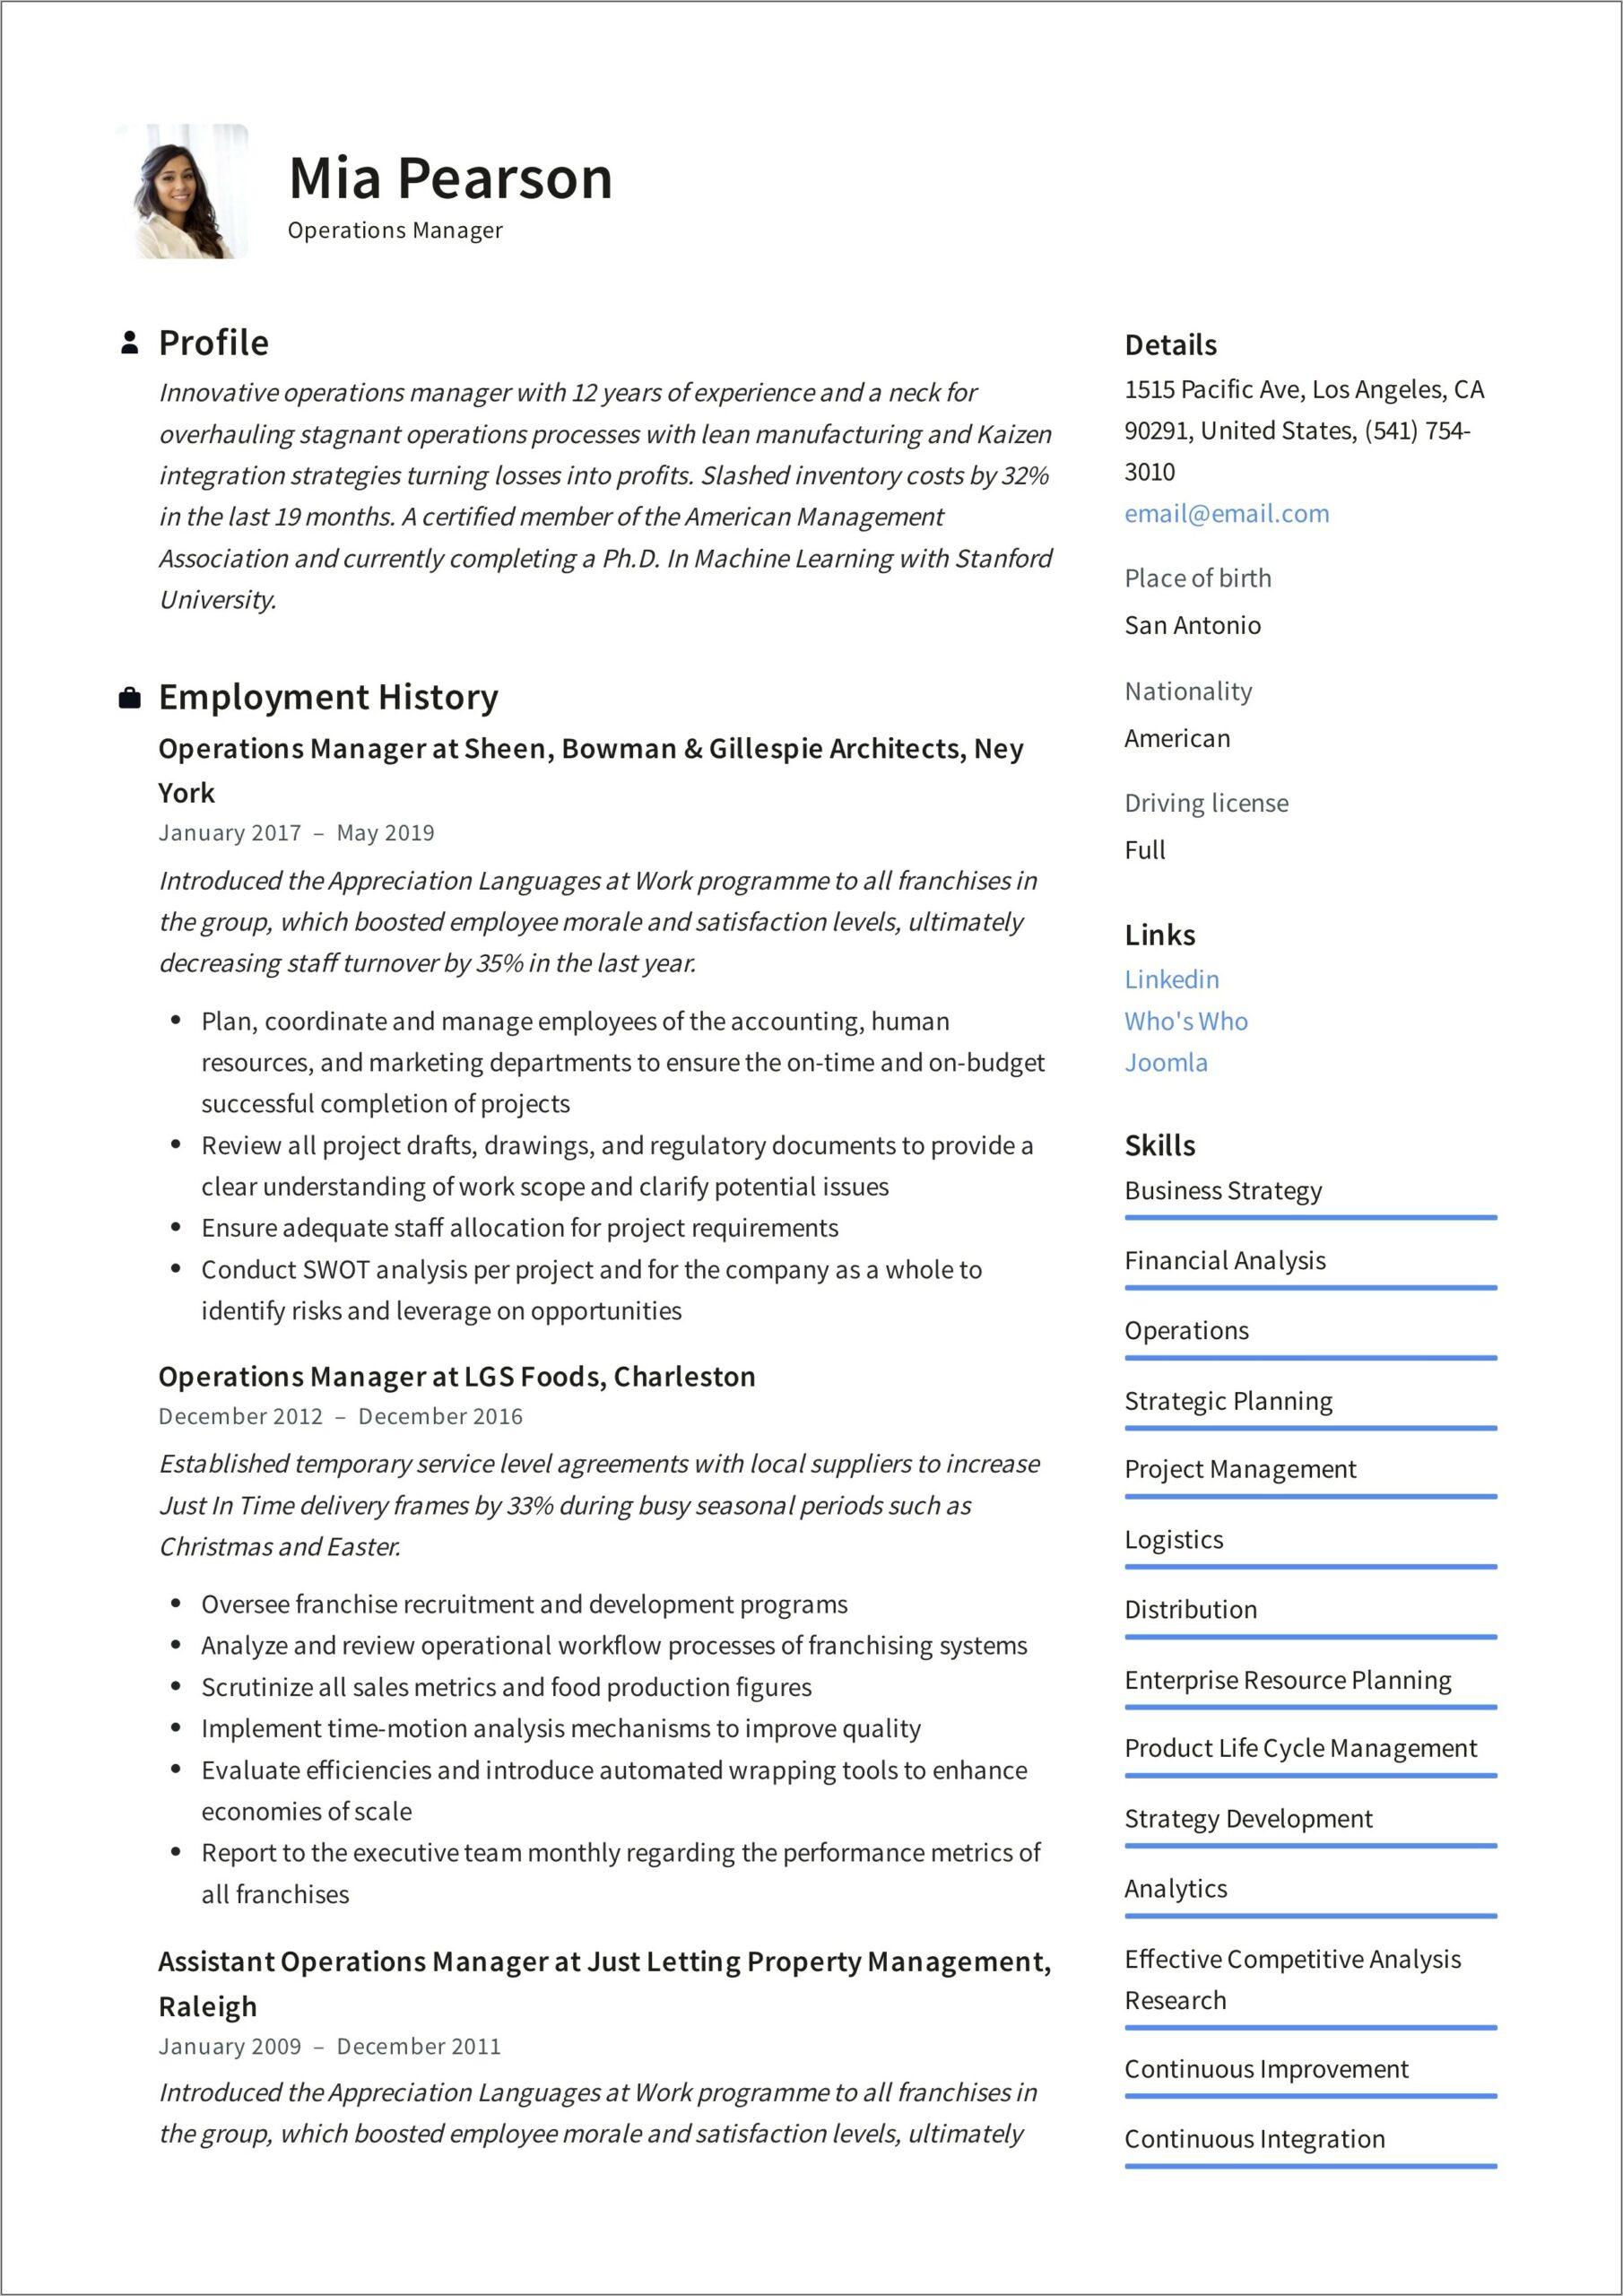 Resume For Logistics Operations Manager